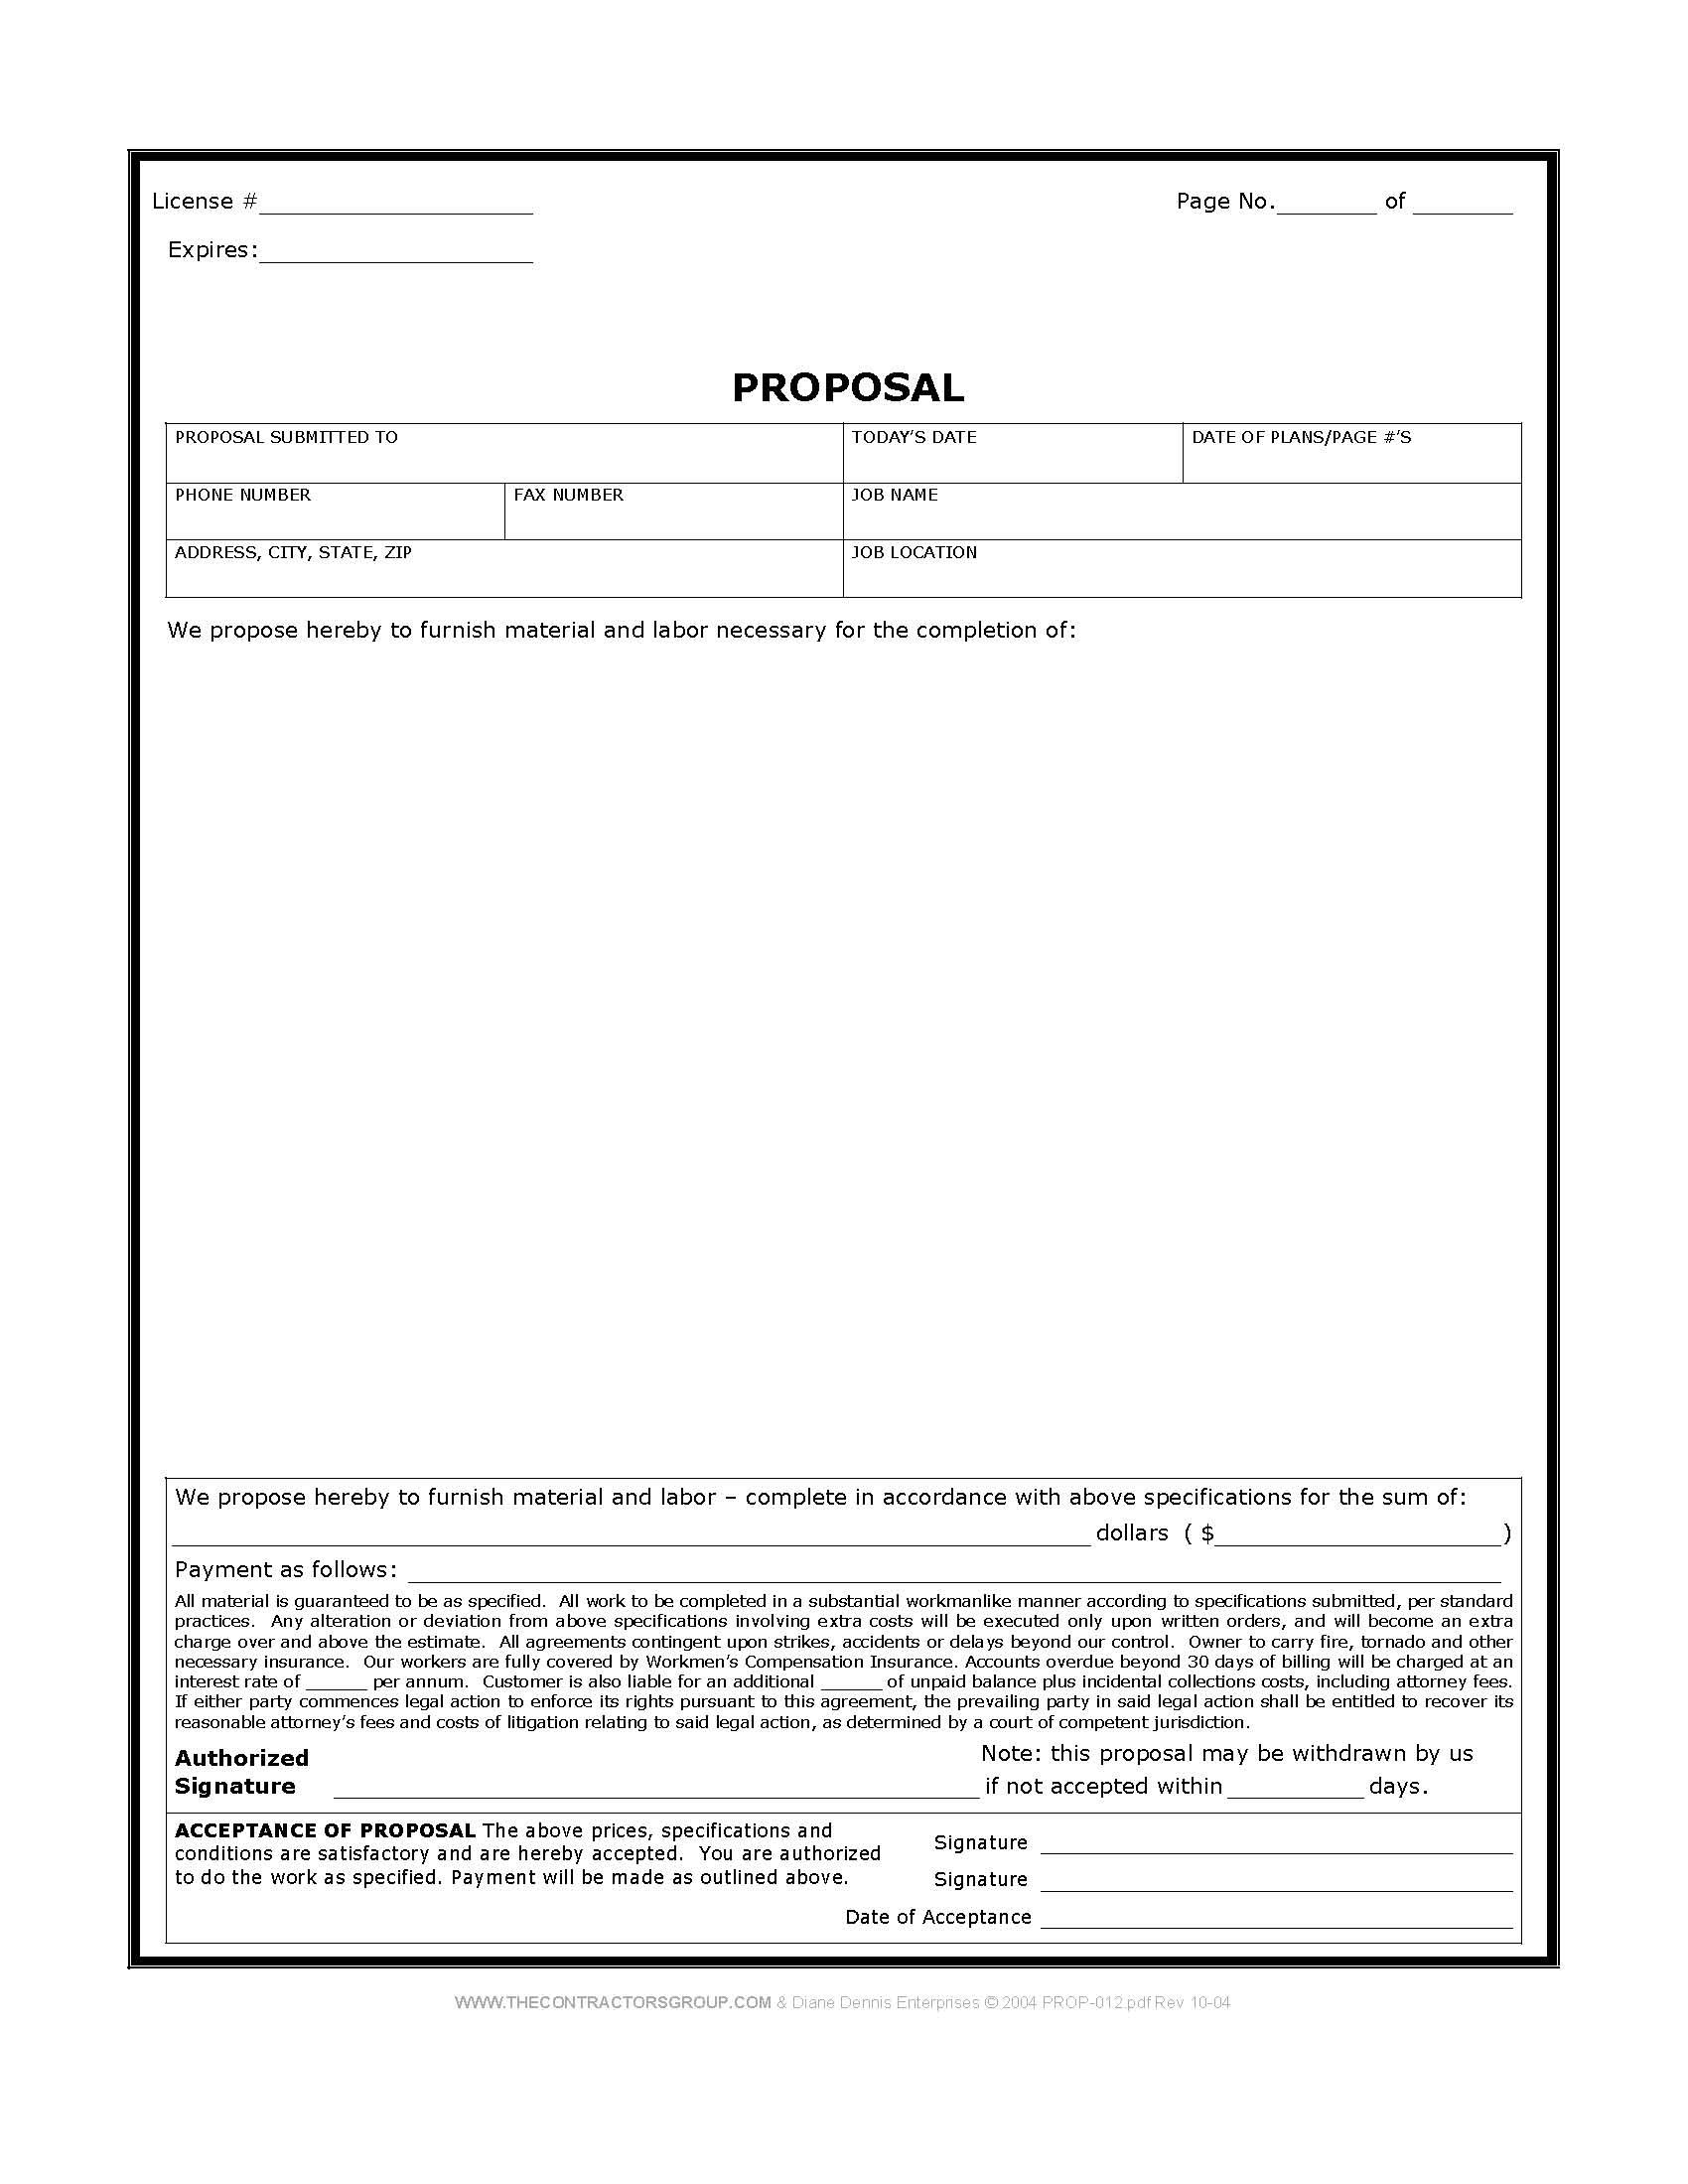 Free Print Contractor Proposal Forms | Construction Proposal Form - Free Printable Contractor Proposal Forms